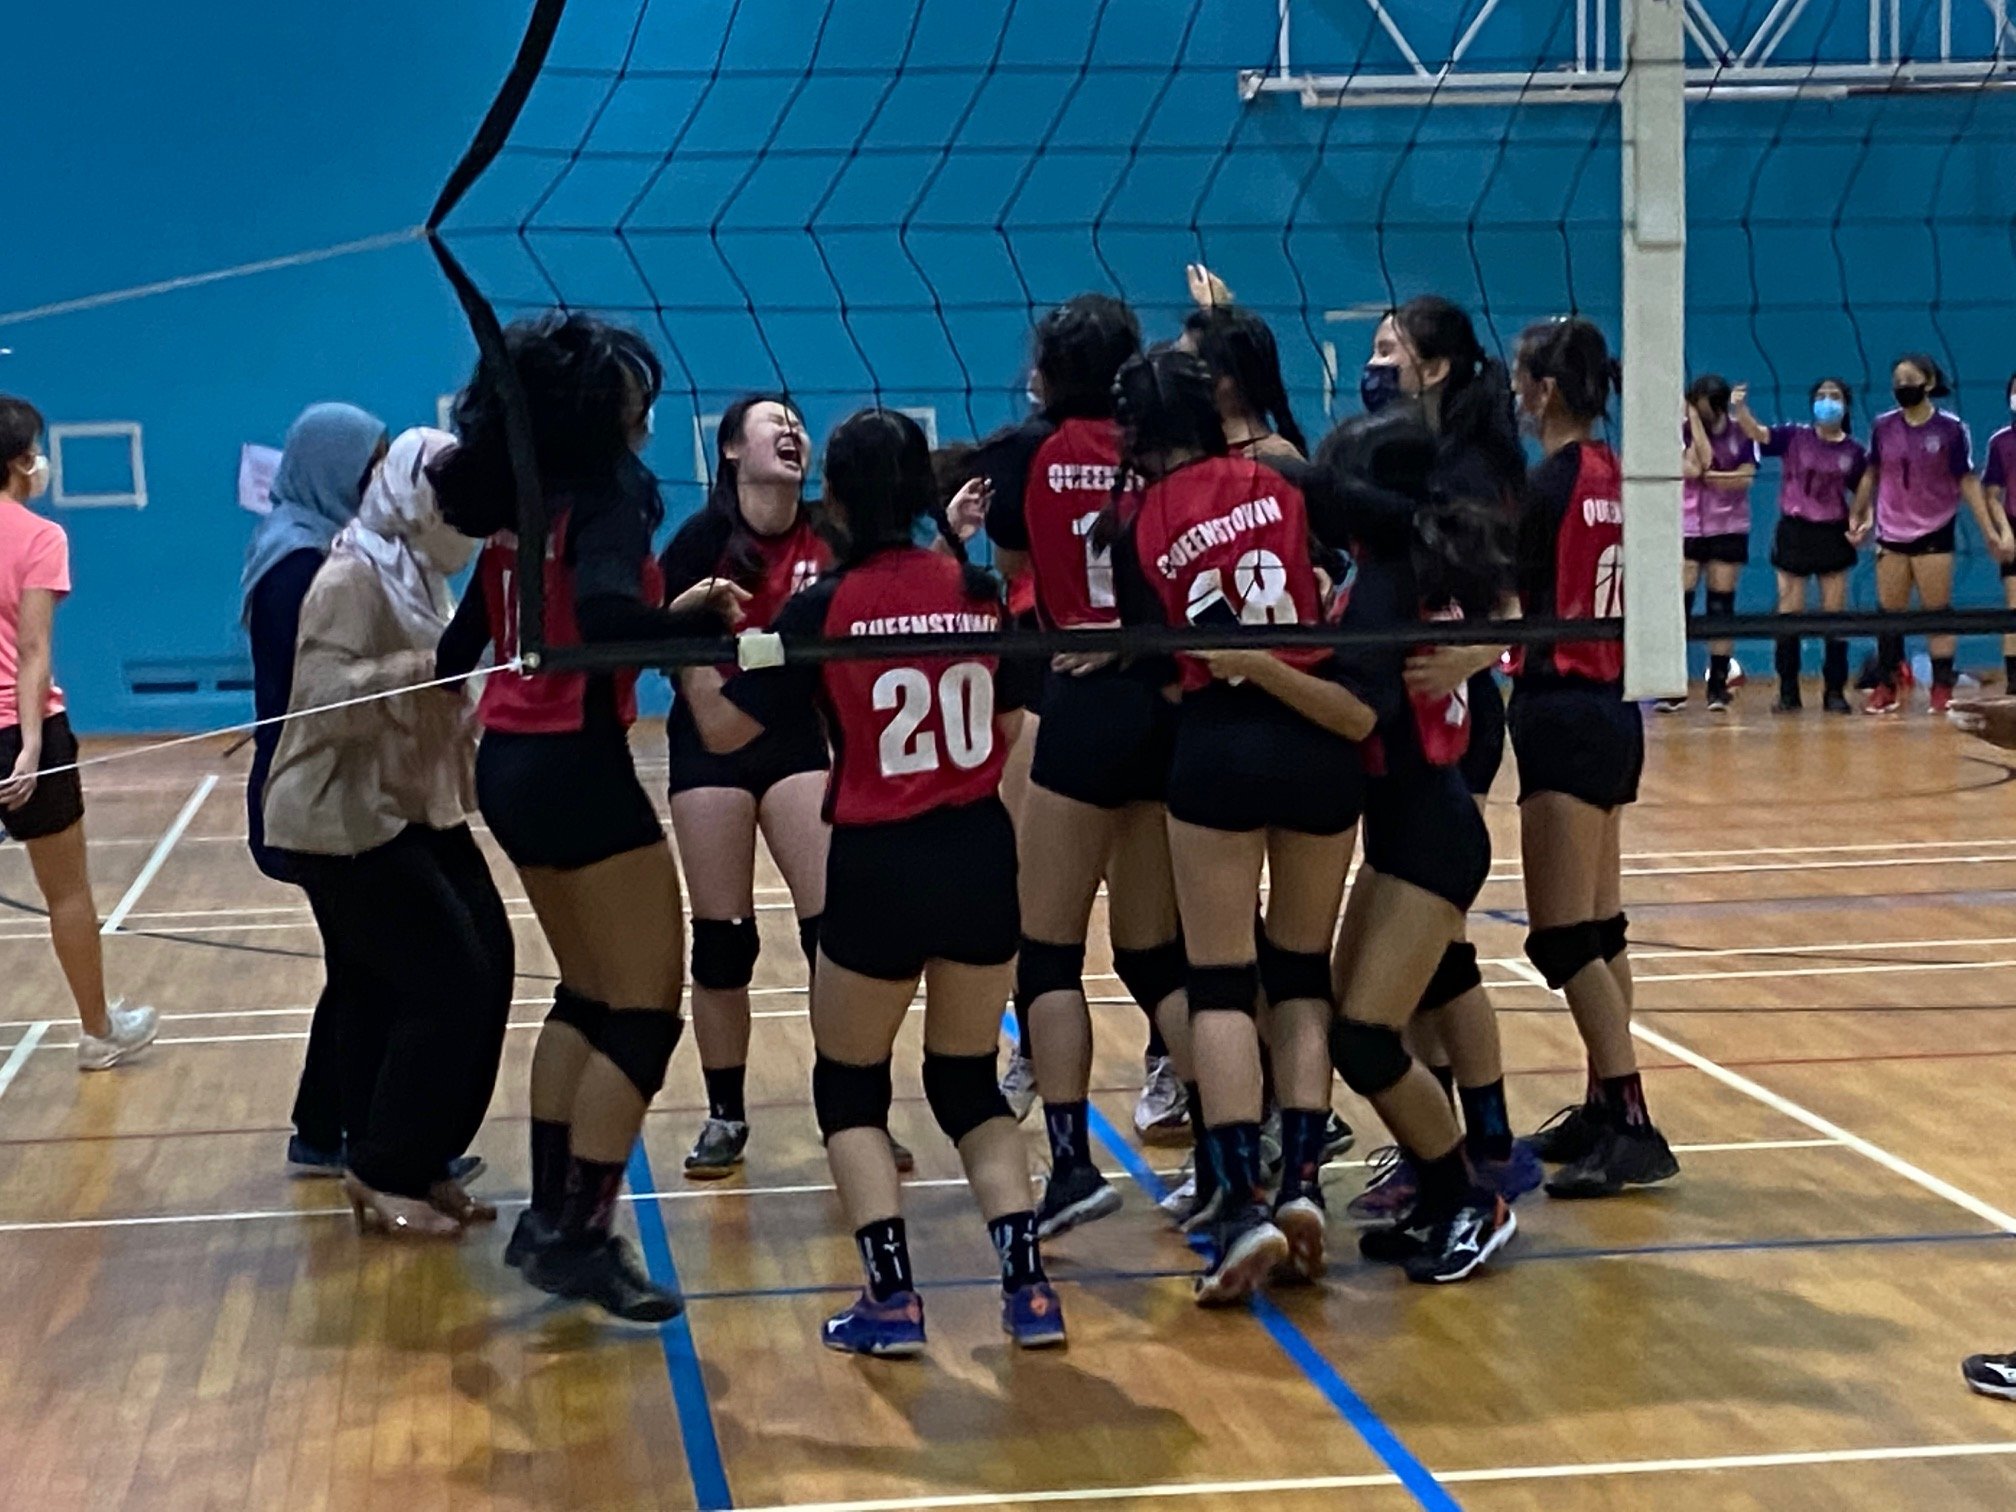 NSG South Zone B Div girls volleyball final - Queenstown (red) v Queensway (purple) 4